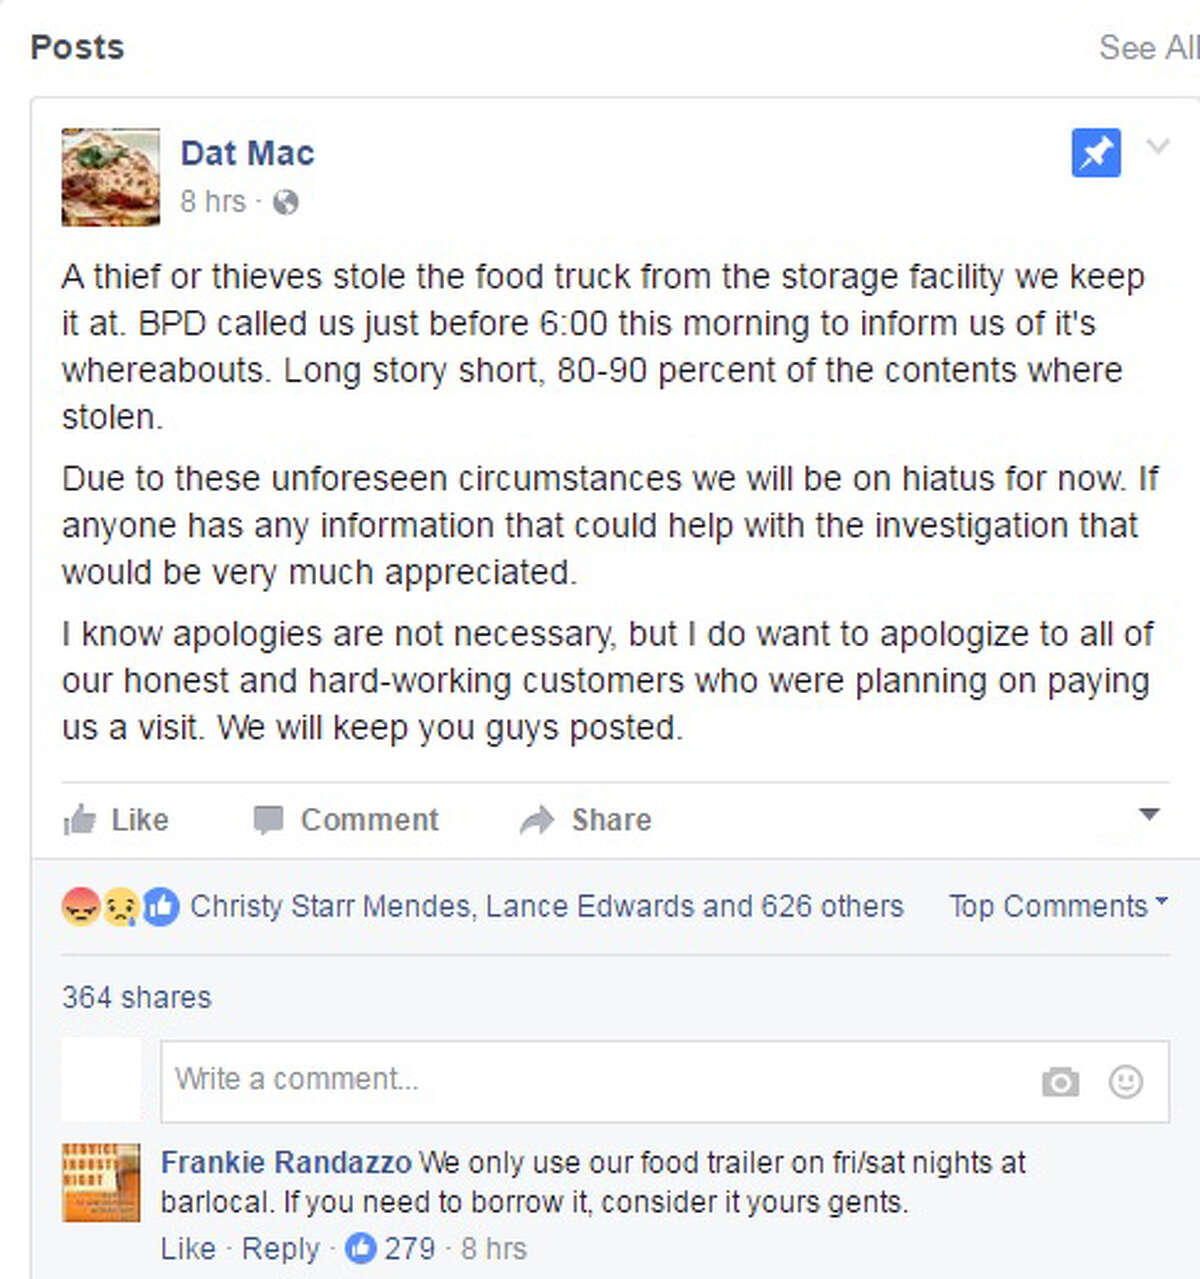 After a Beaumont food truck got robbed on Thursday, local supporters of Dat Mac took to social media expressing their support for the local business.